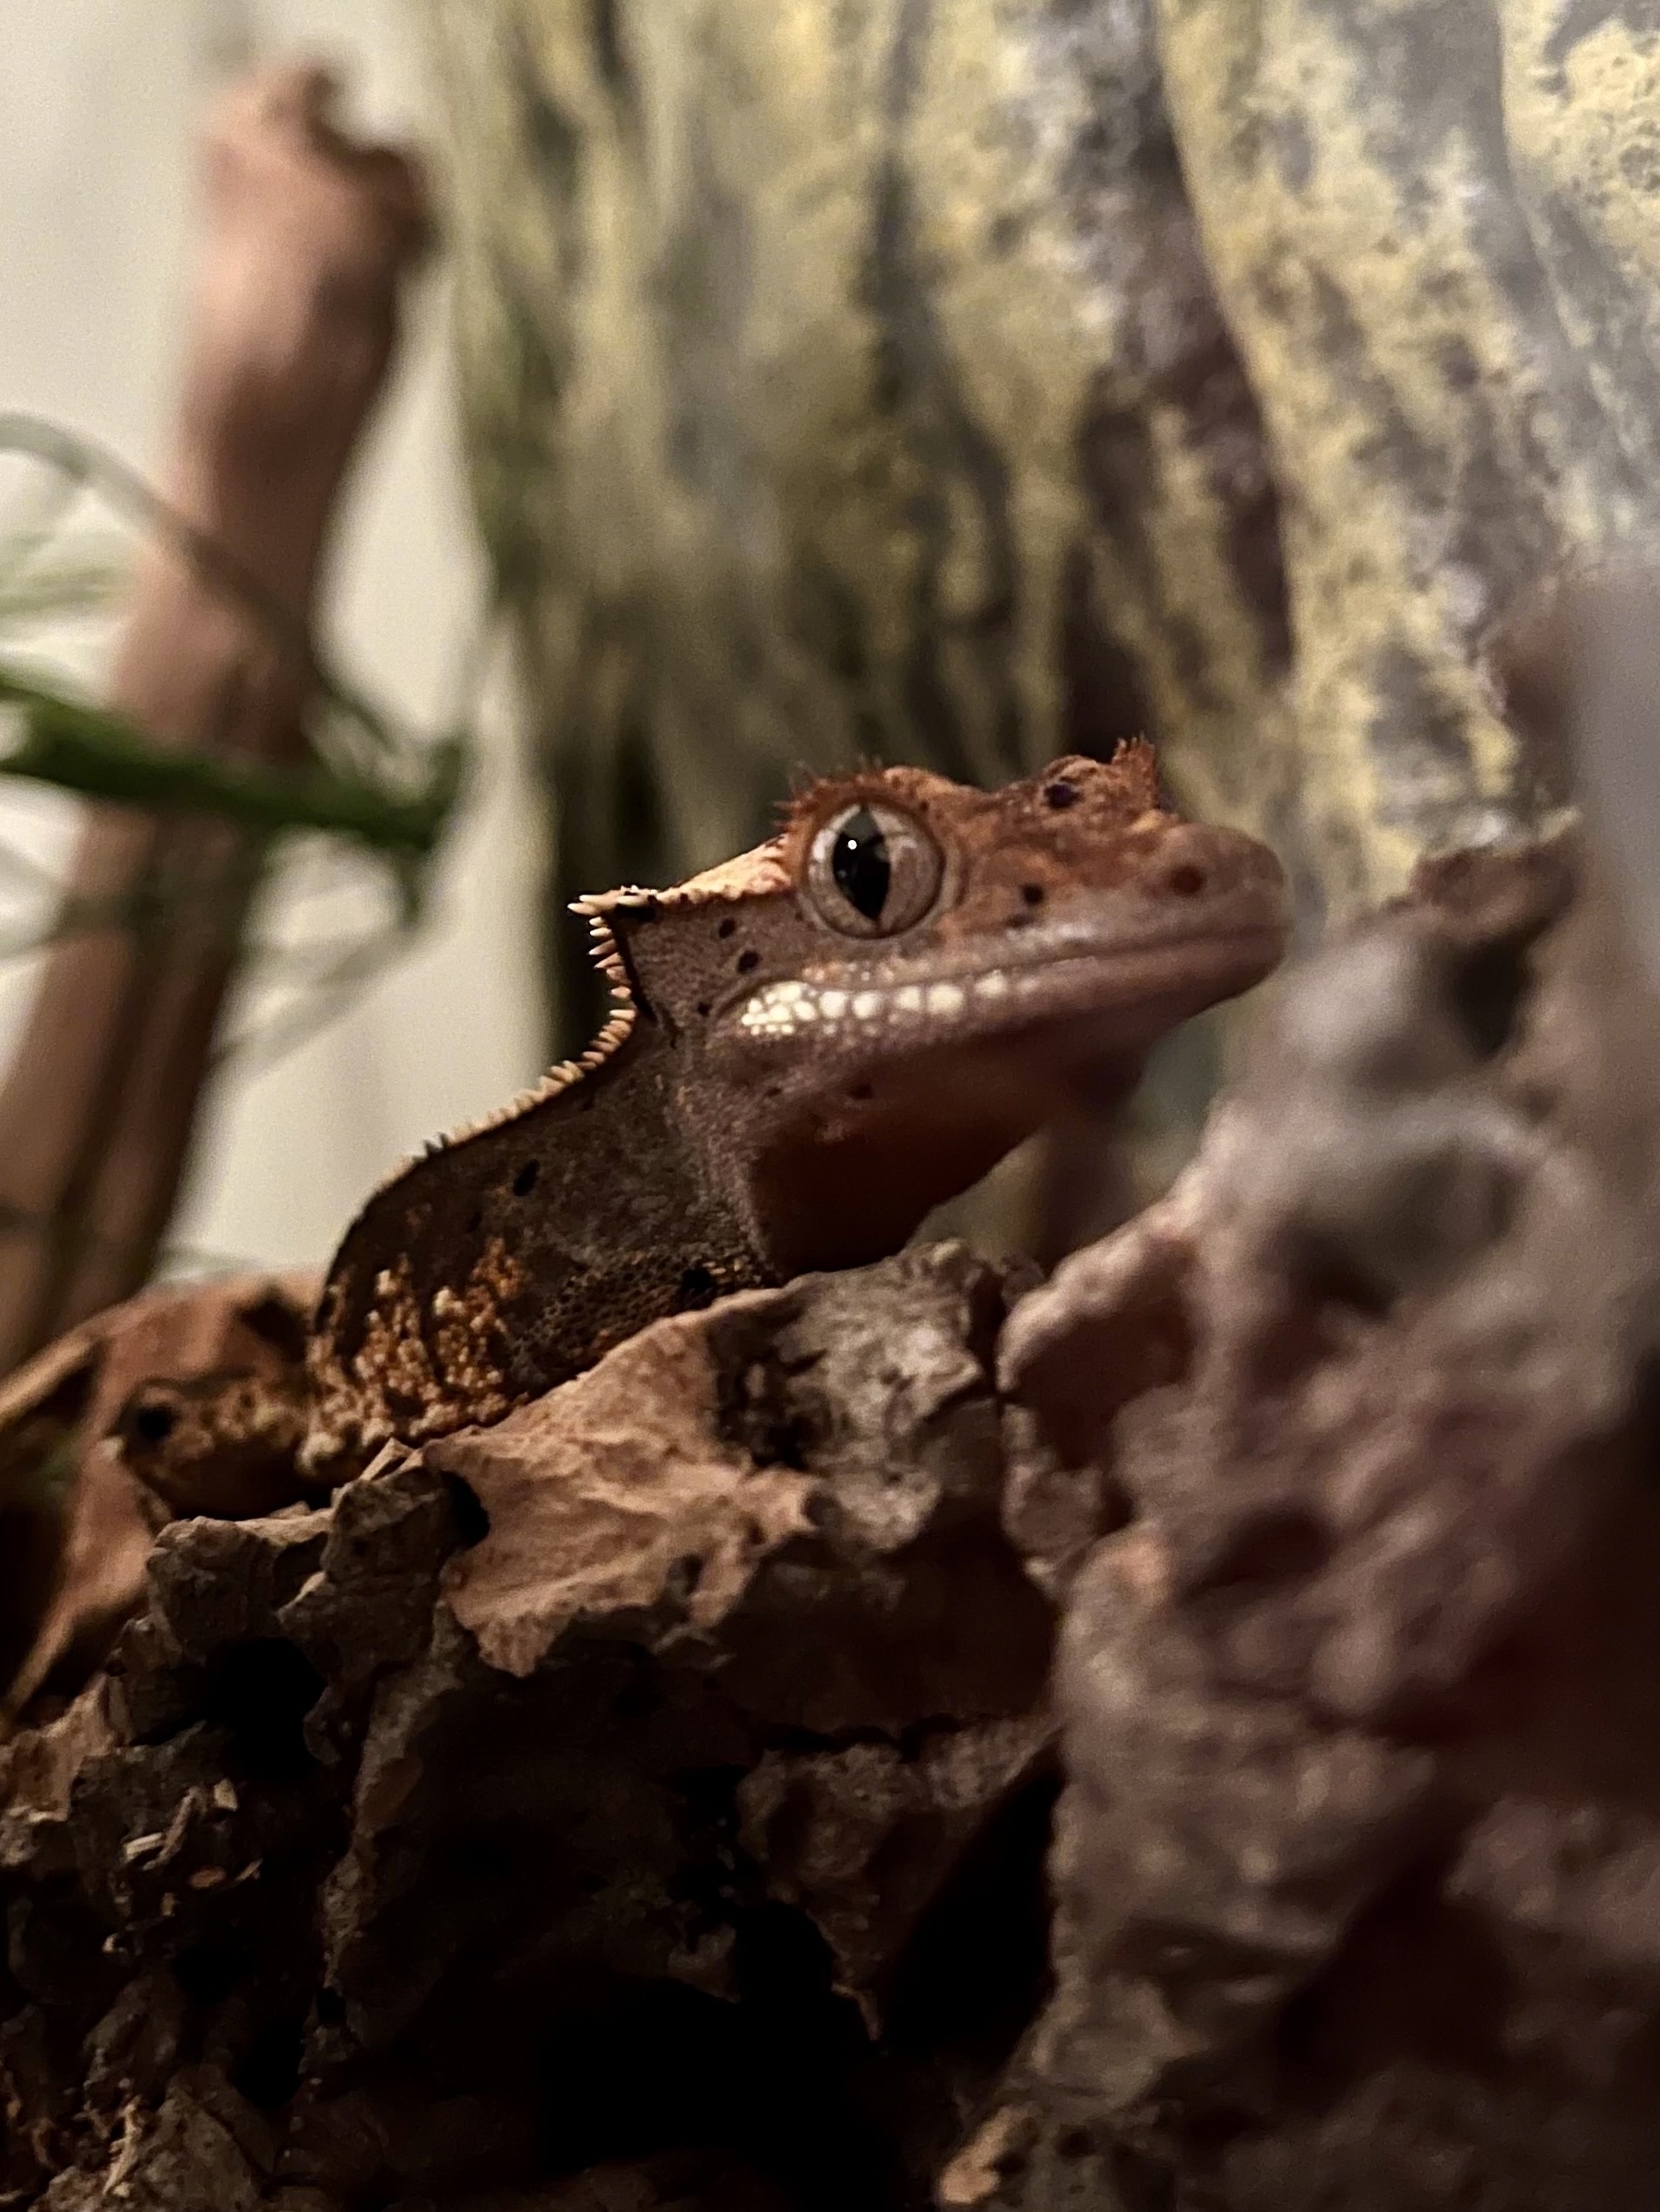 Close up of a crested gecko